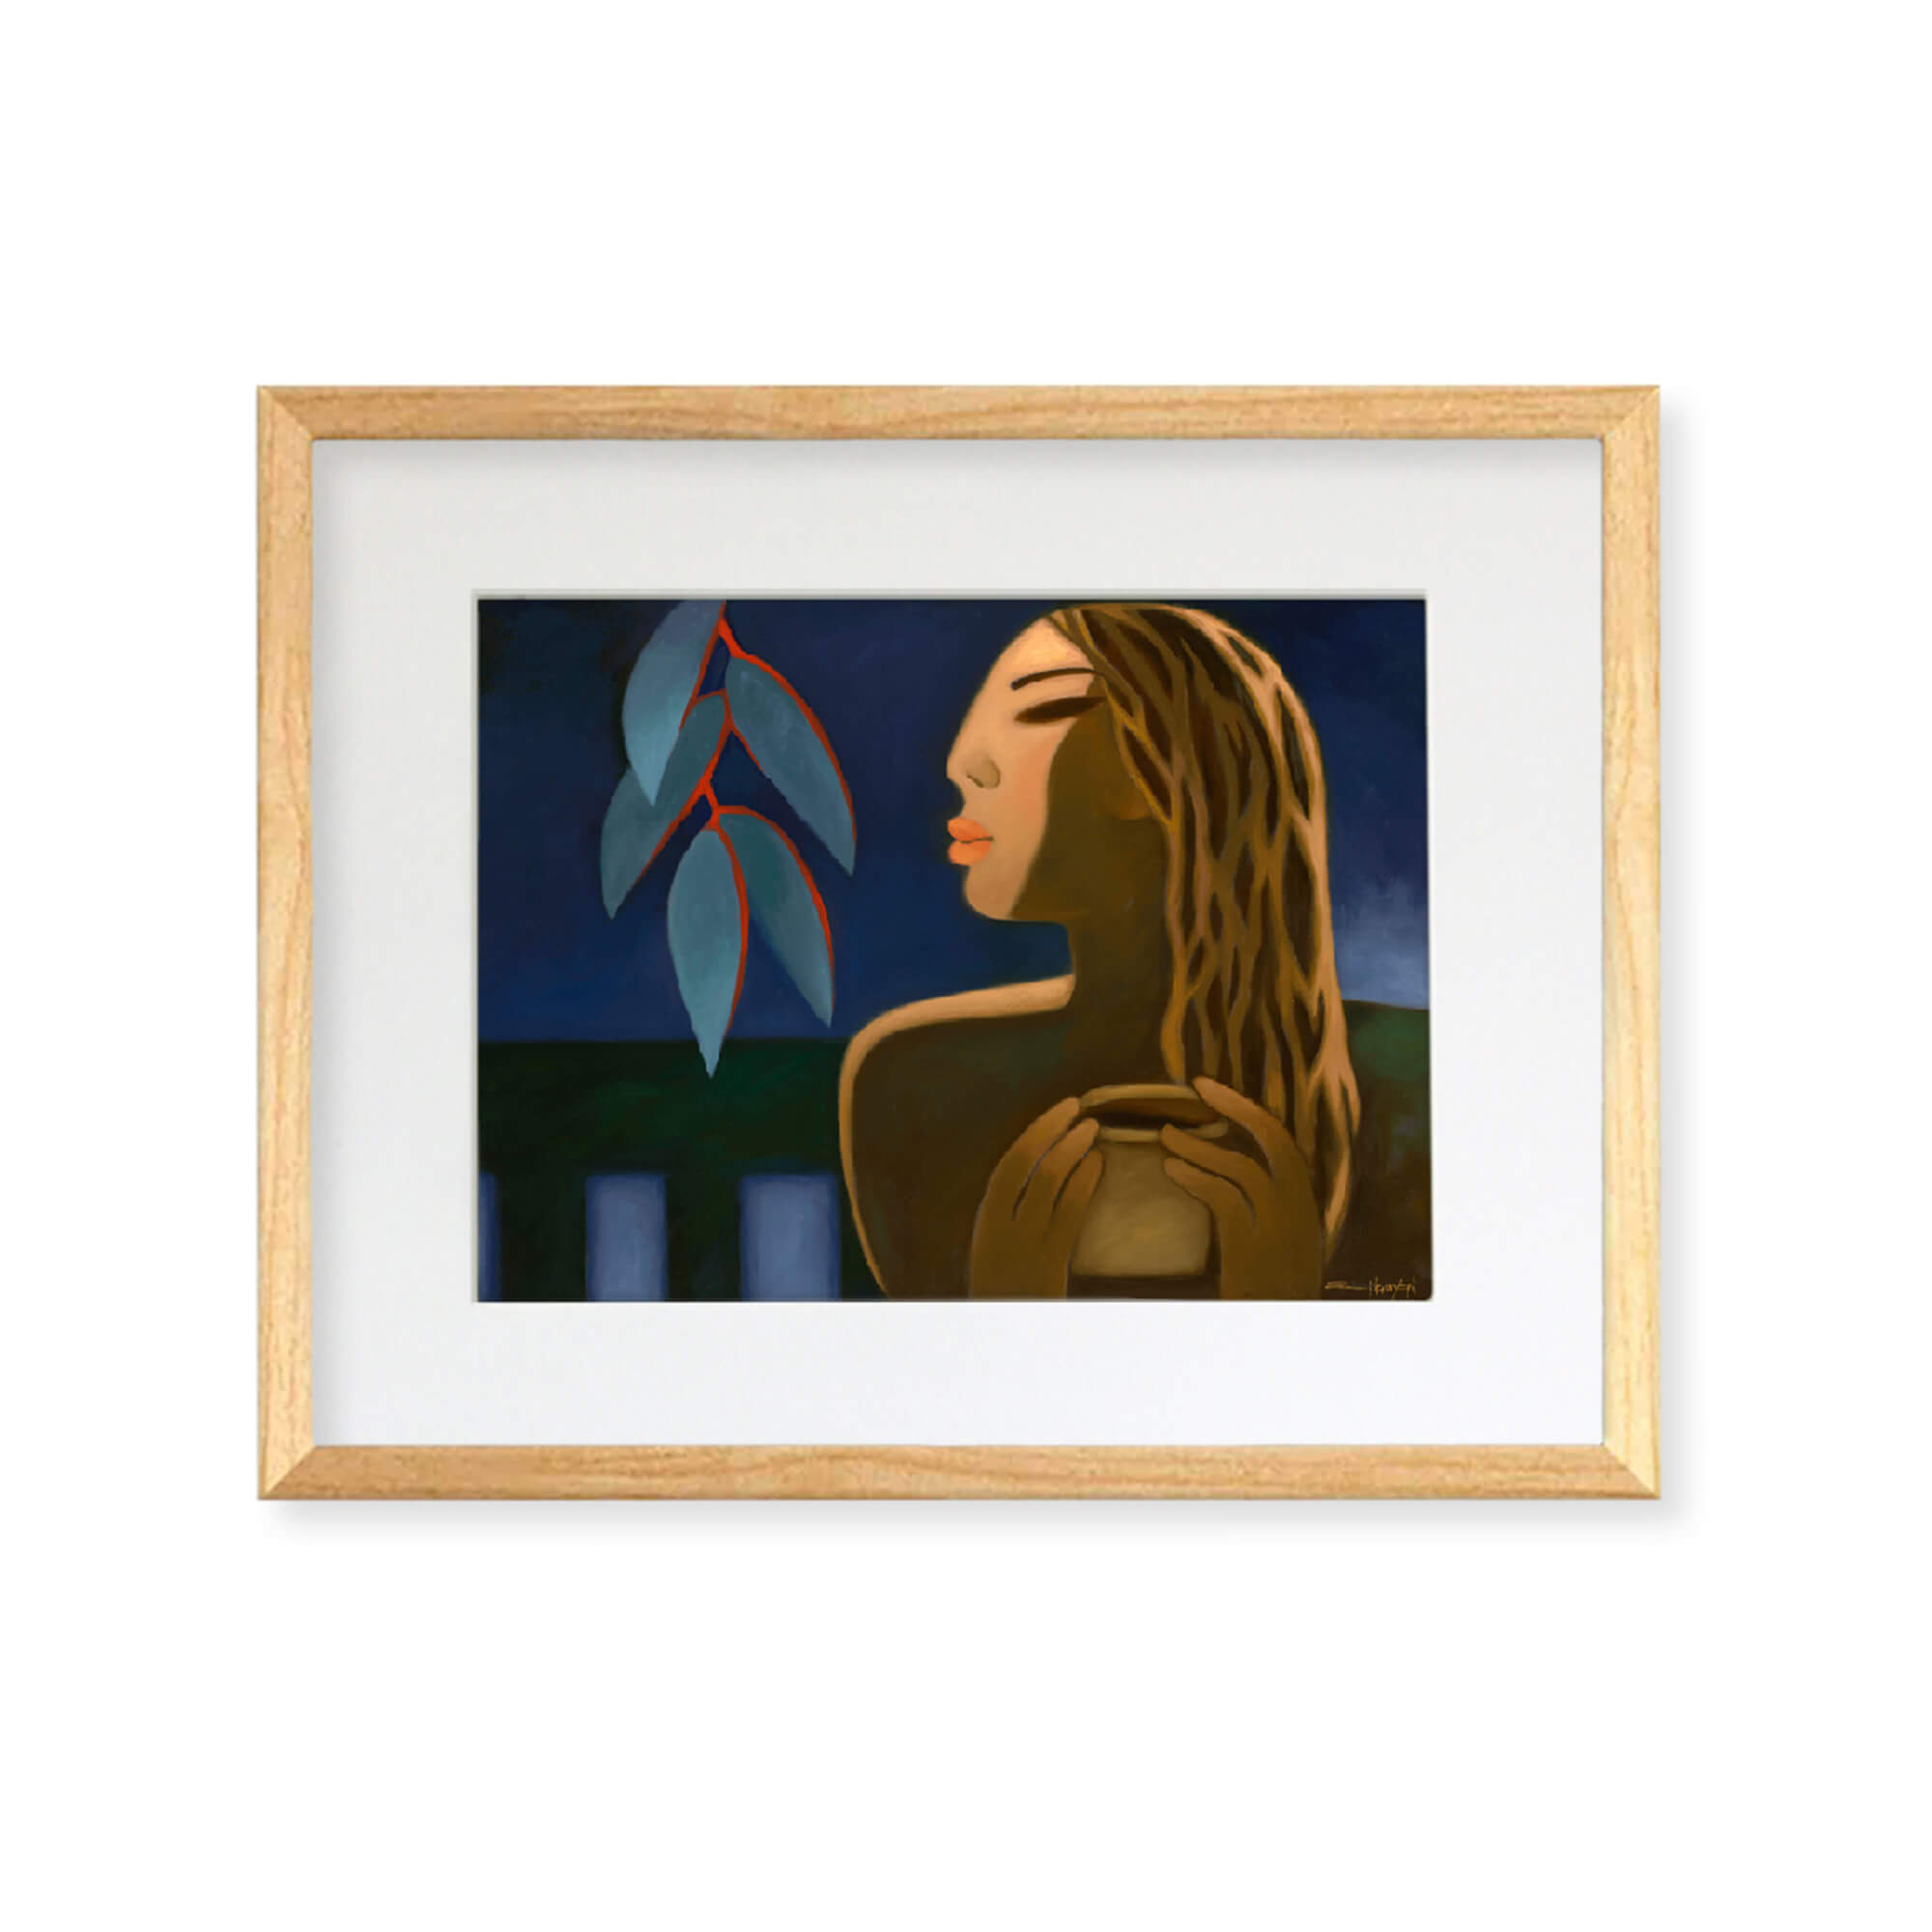 Framed matted art print of a woman with a cut of coffee by Hawaii artist Tim Nguyen